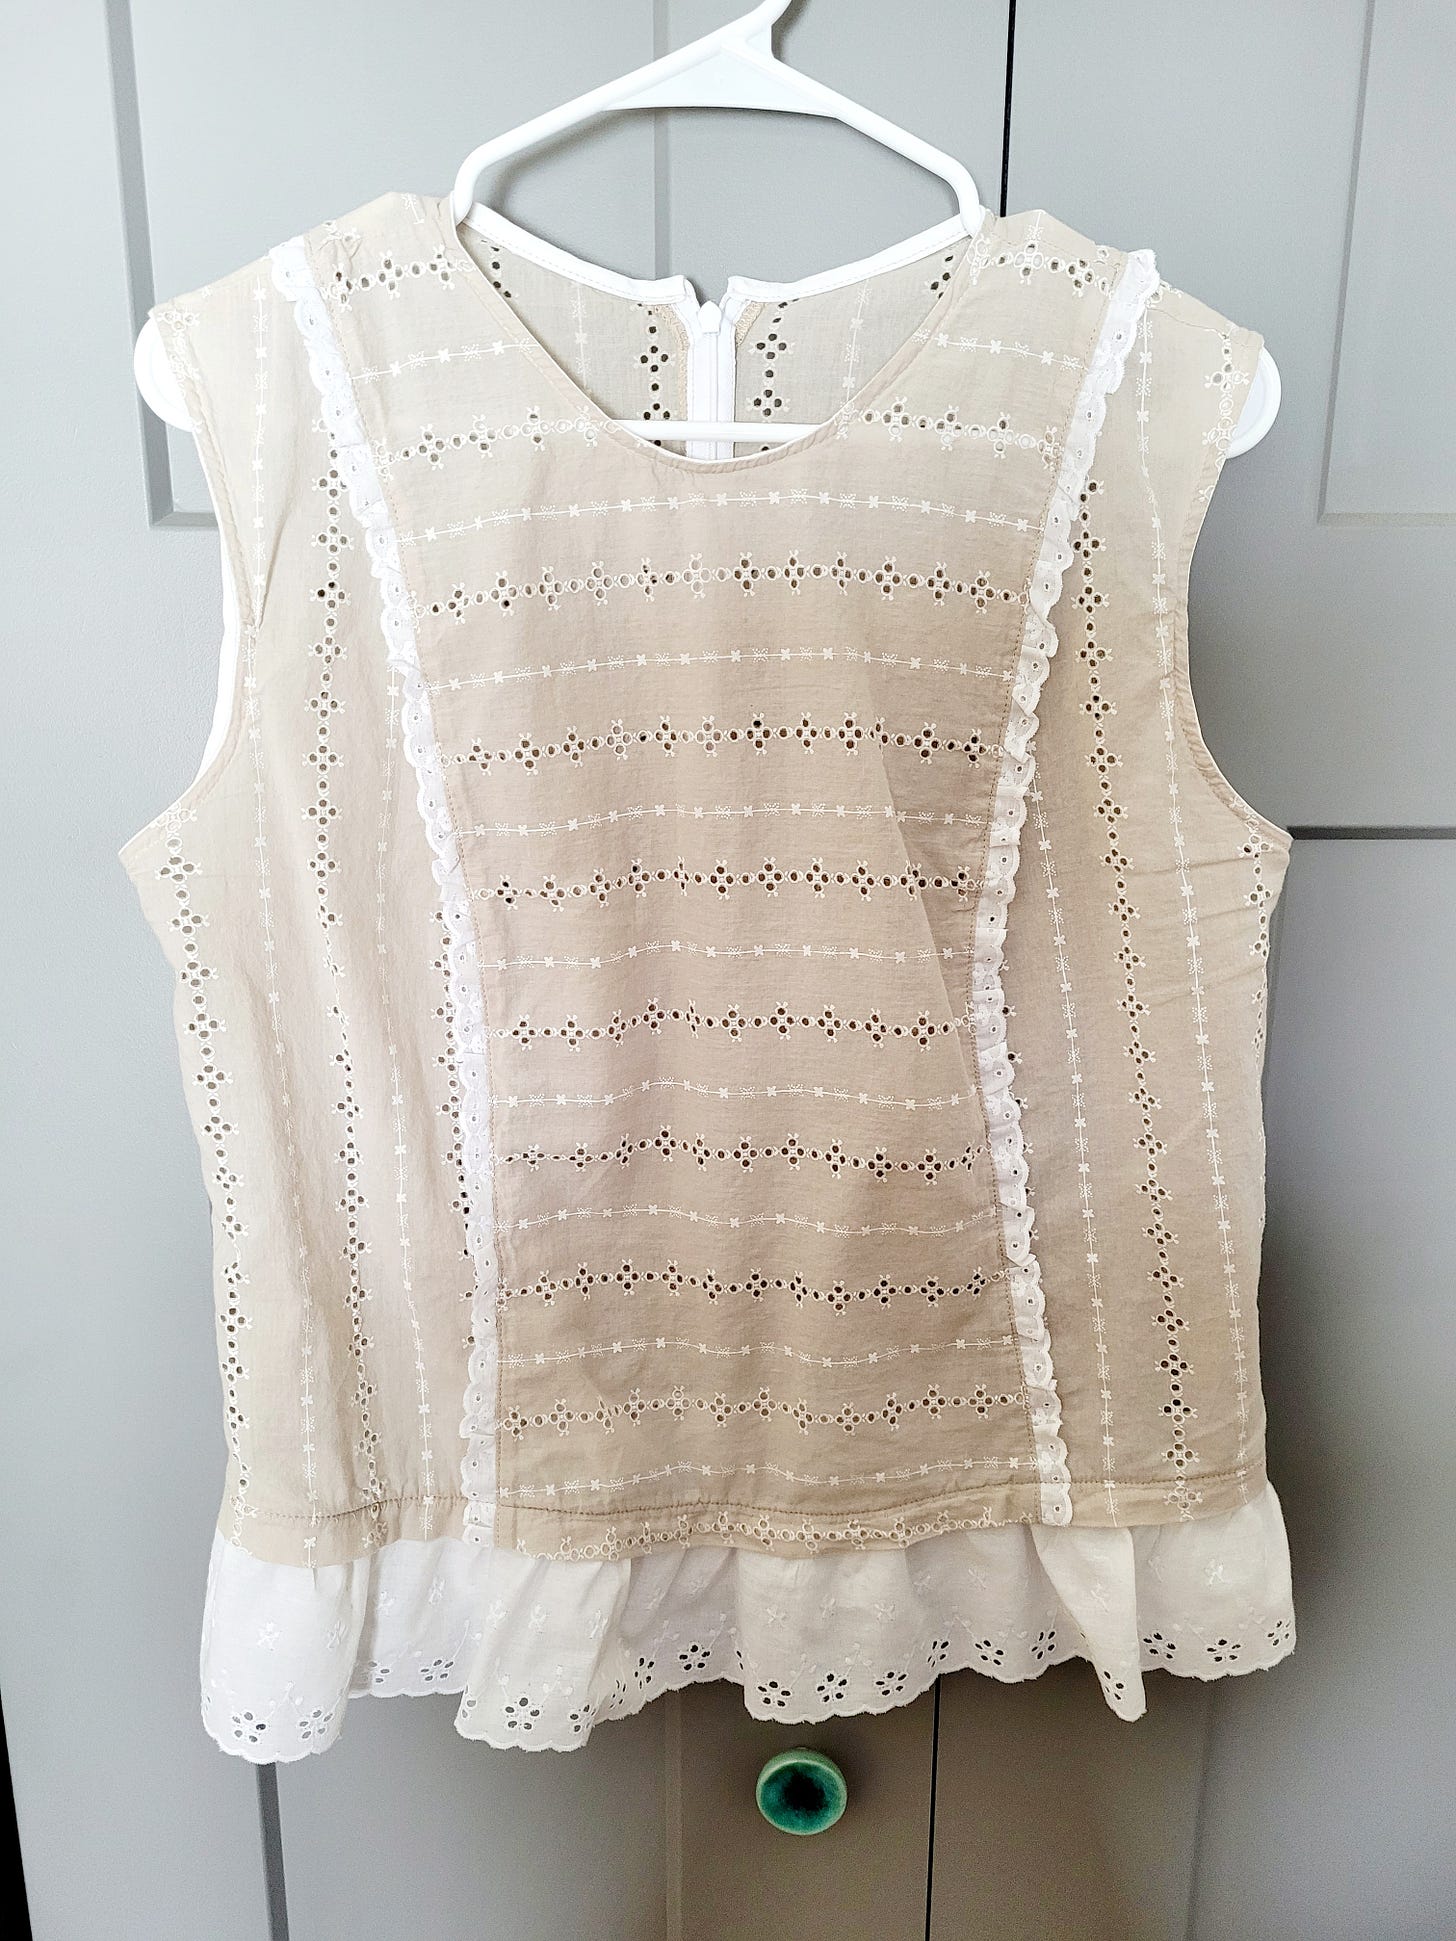 An eyelet top I recently finished, sleeveless beige with white eyelet trim in the princess seams and around the bottom hem, McCall's pattern #8096